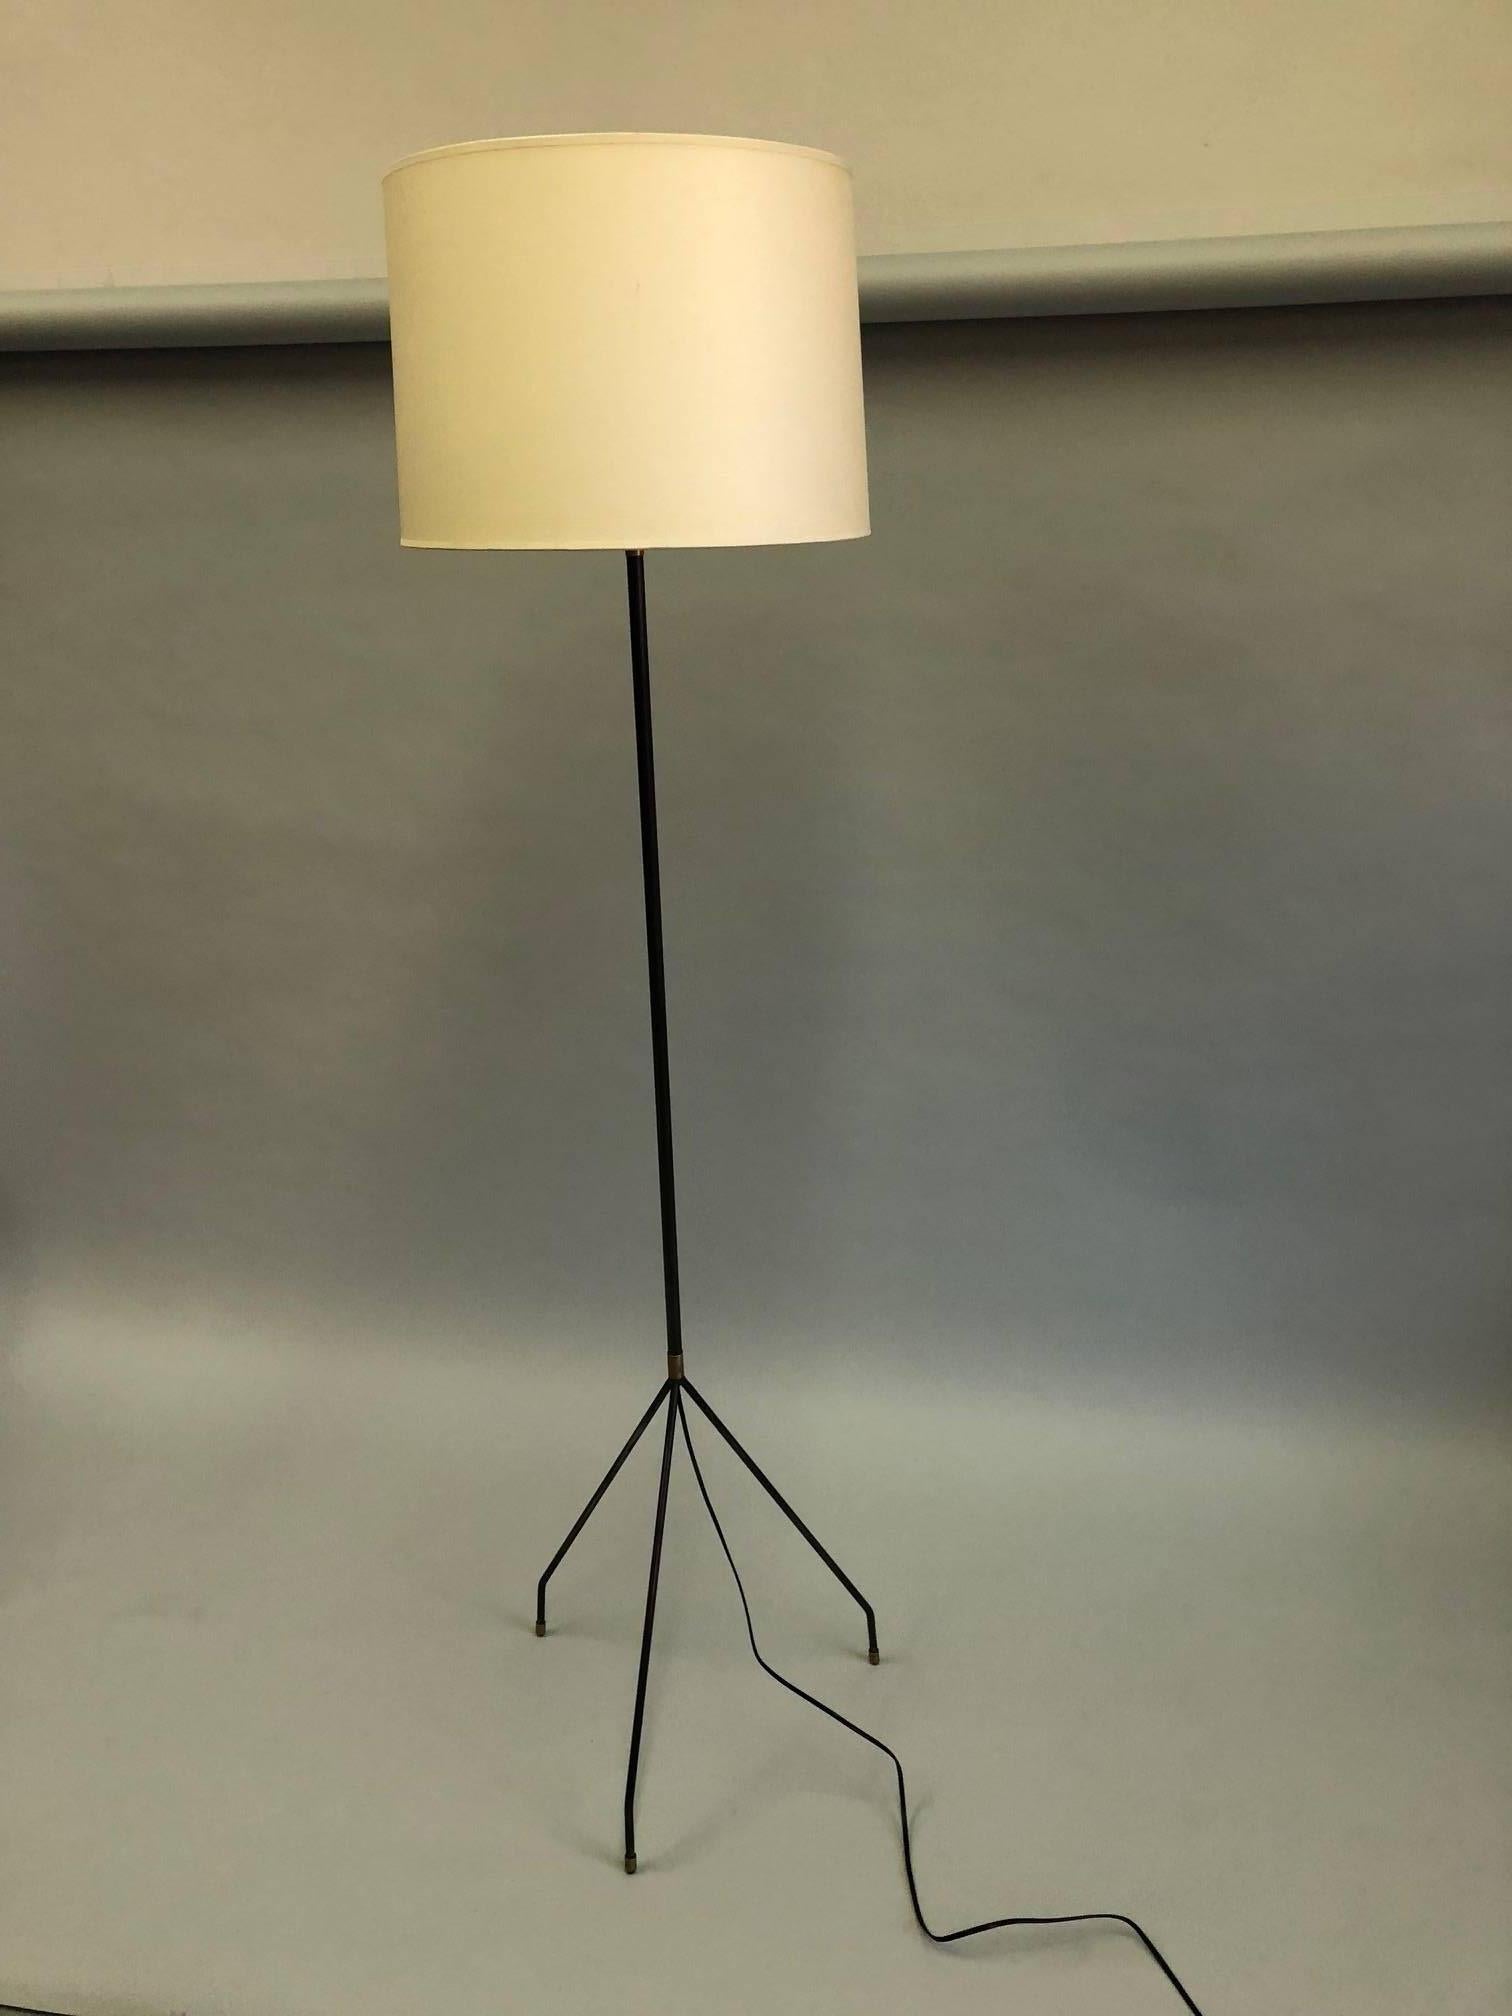 Elegant, sleek pair of French Midcentury Modern hand wrought iron floor lamps by Disderot. The standing lamps are delicately conceived with a slender iron stem that parts into a tripod base composed of thin, round iron bars that narrow to slim feet.